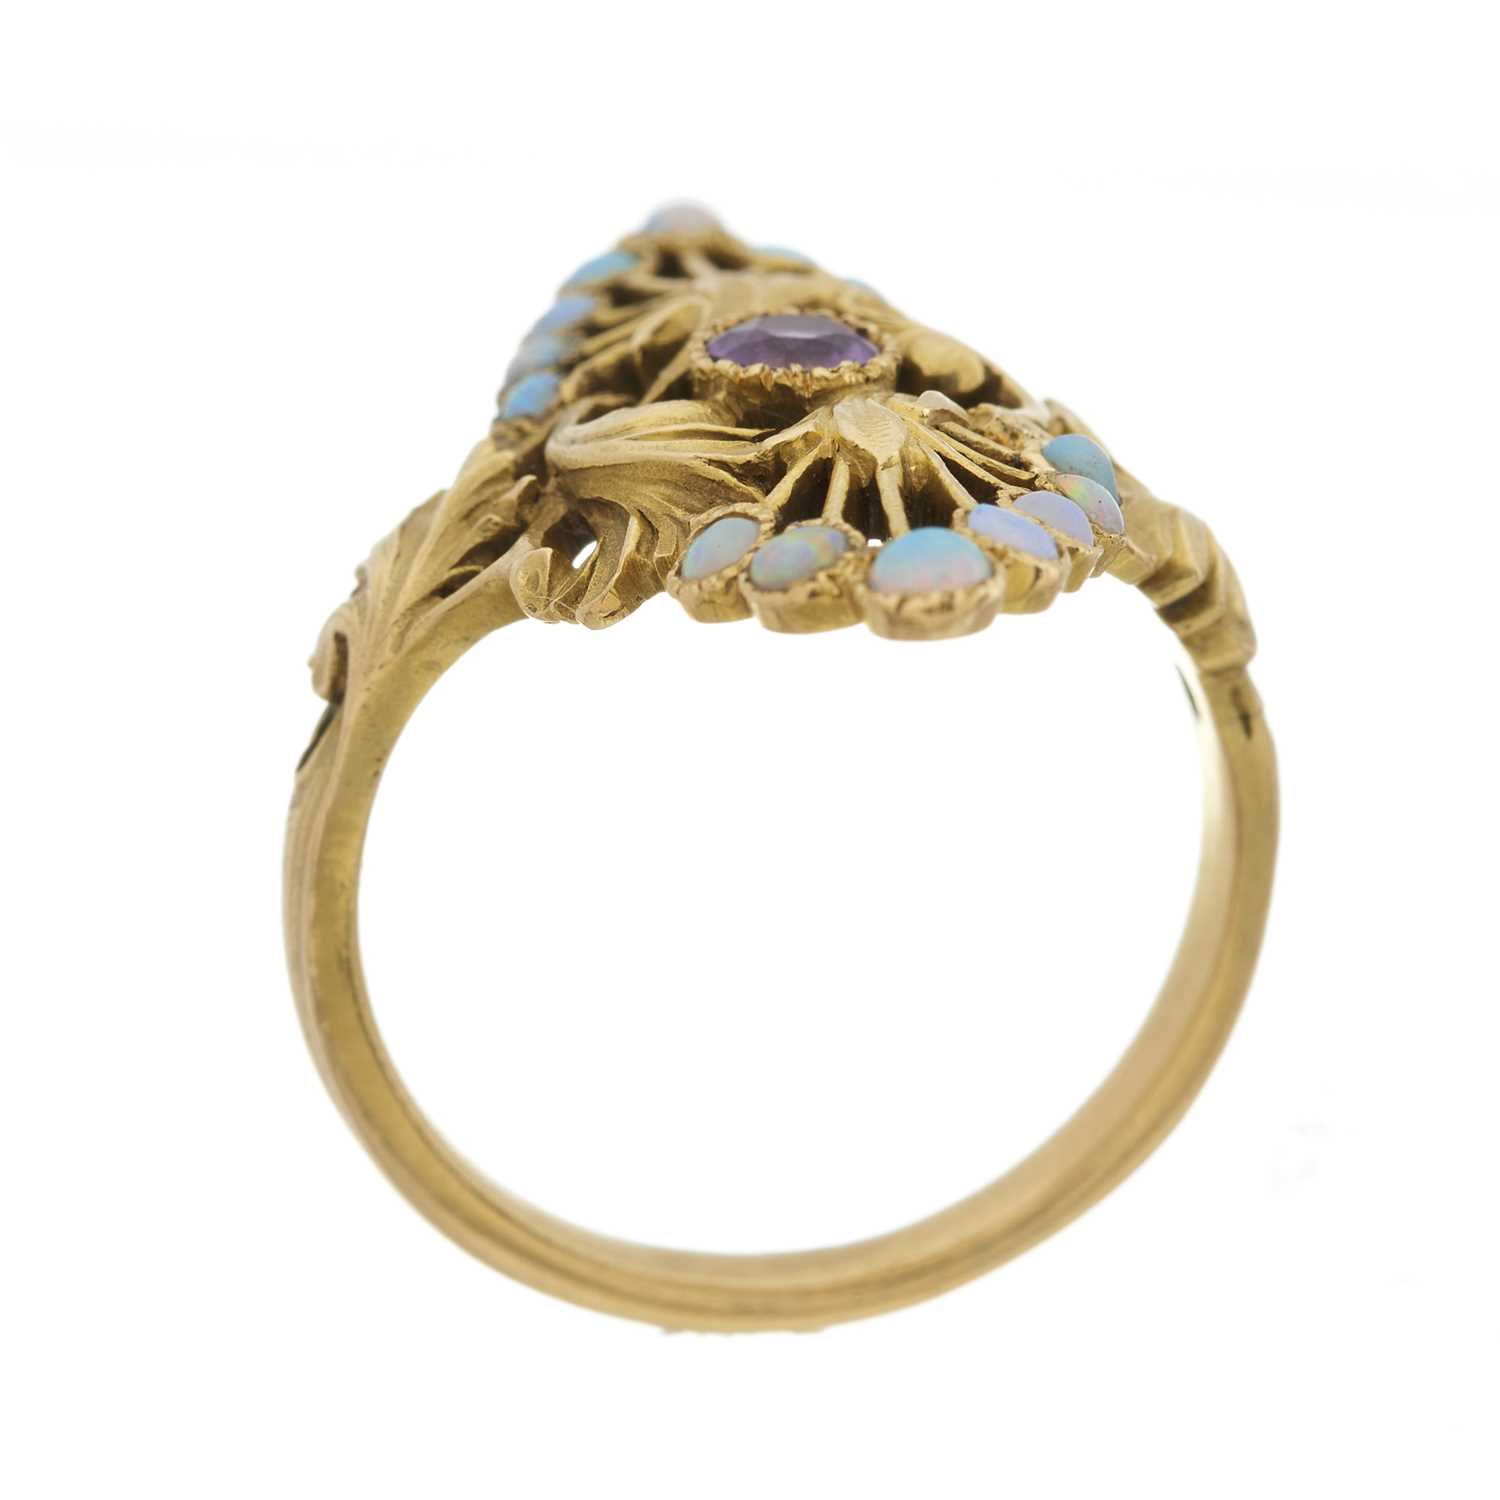 Antoine Bricteux (attributed), an Art Nouveau 18ct gold amethyst and opal dress ring - Image 2 of 3